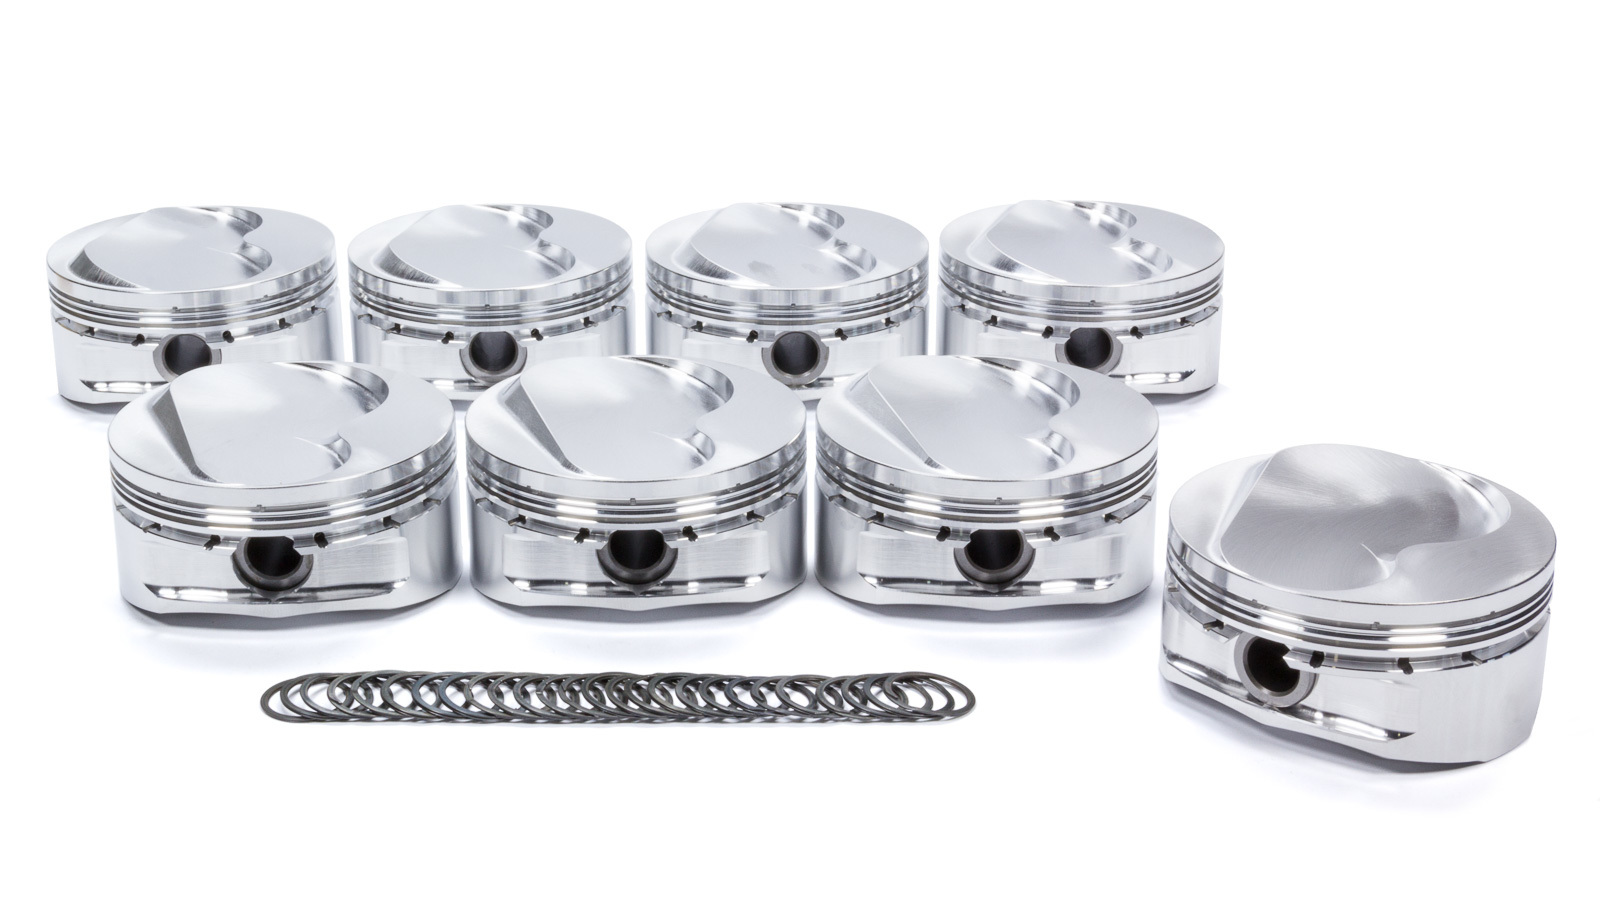 JE Pistons 281793 Piston, Small Block Open Chamber Dome, Forged, 4.125 in Bore, 1.2 x 1.5 x 3.0 mm Ring Grooves, Minus 4.50 cc, Small Block Chevy, Set of 8